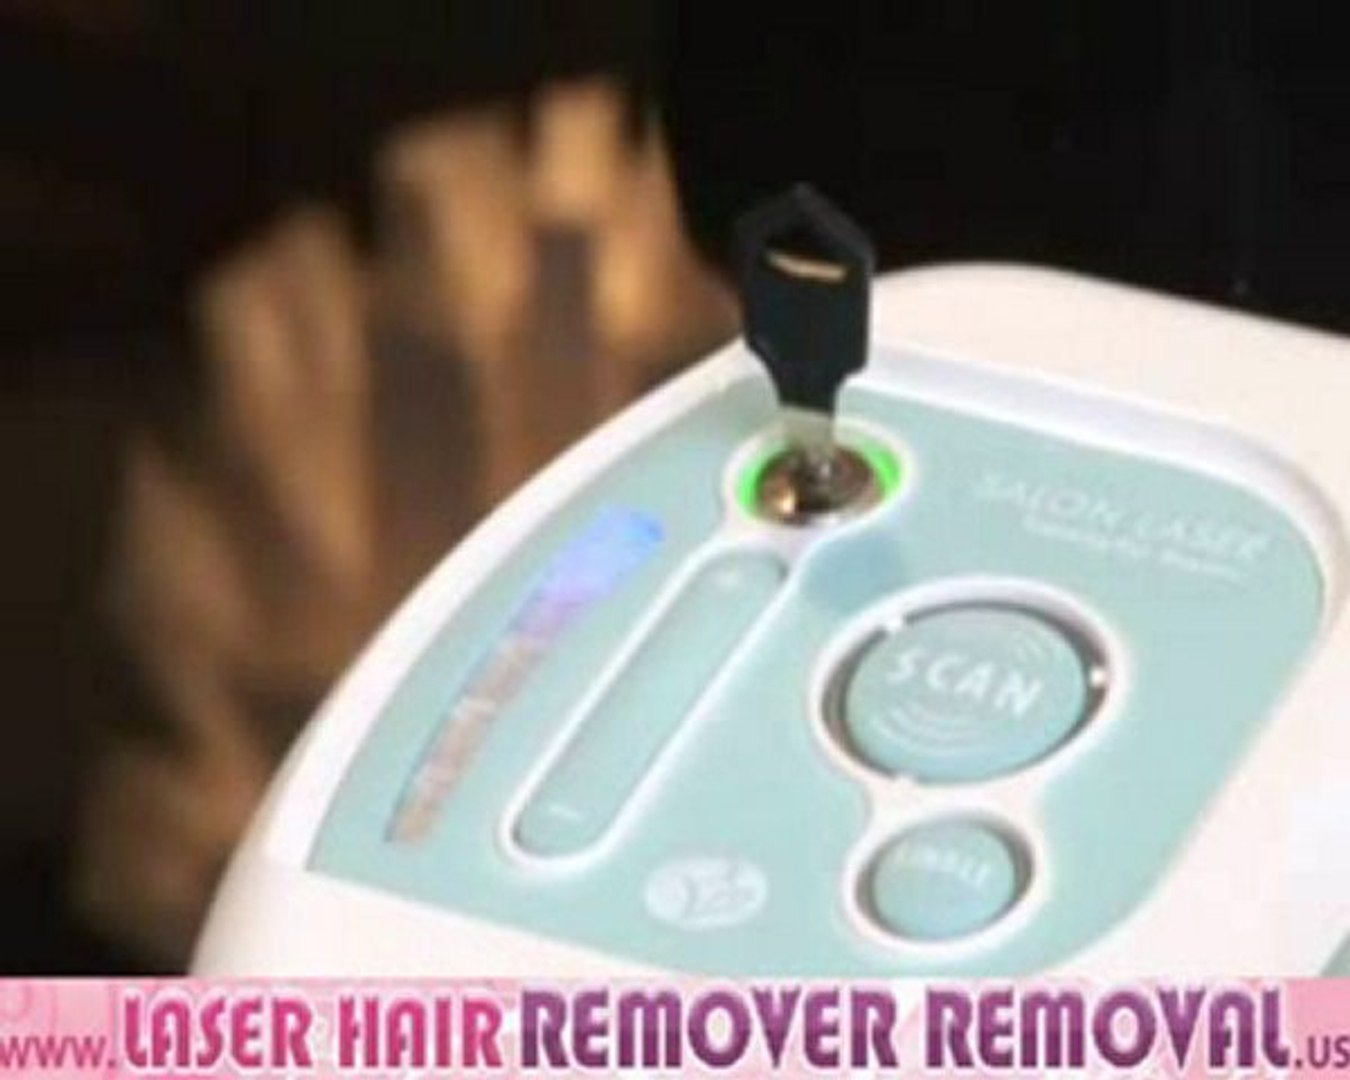 Permanent laser hair removal, Rio Scanning Laser 2/2 - video Dailymotion